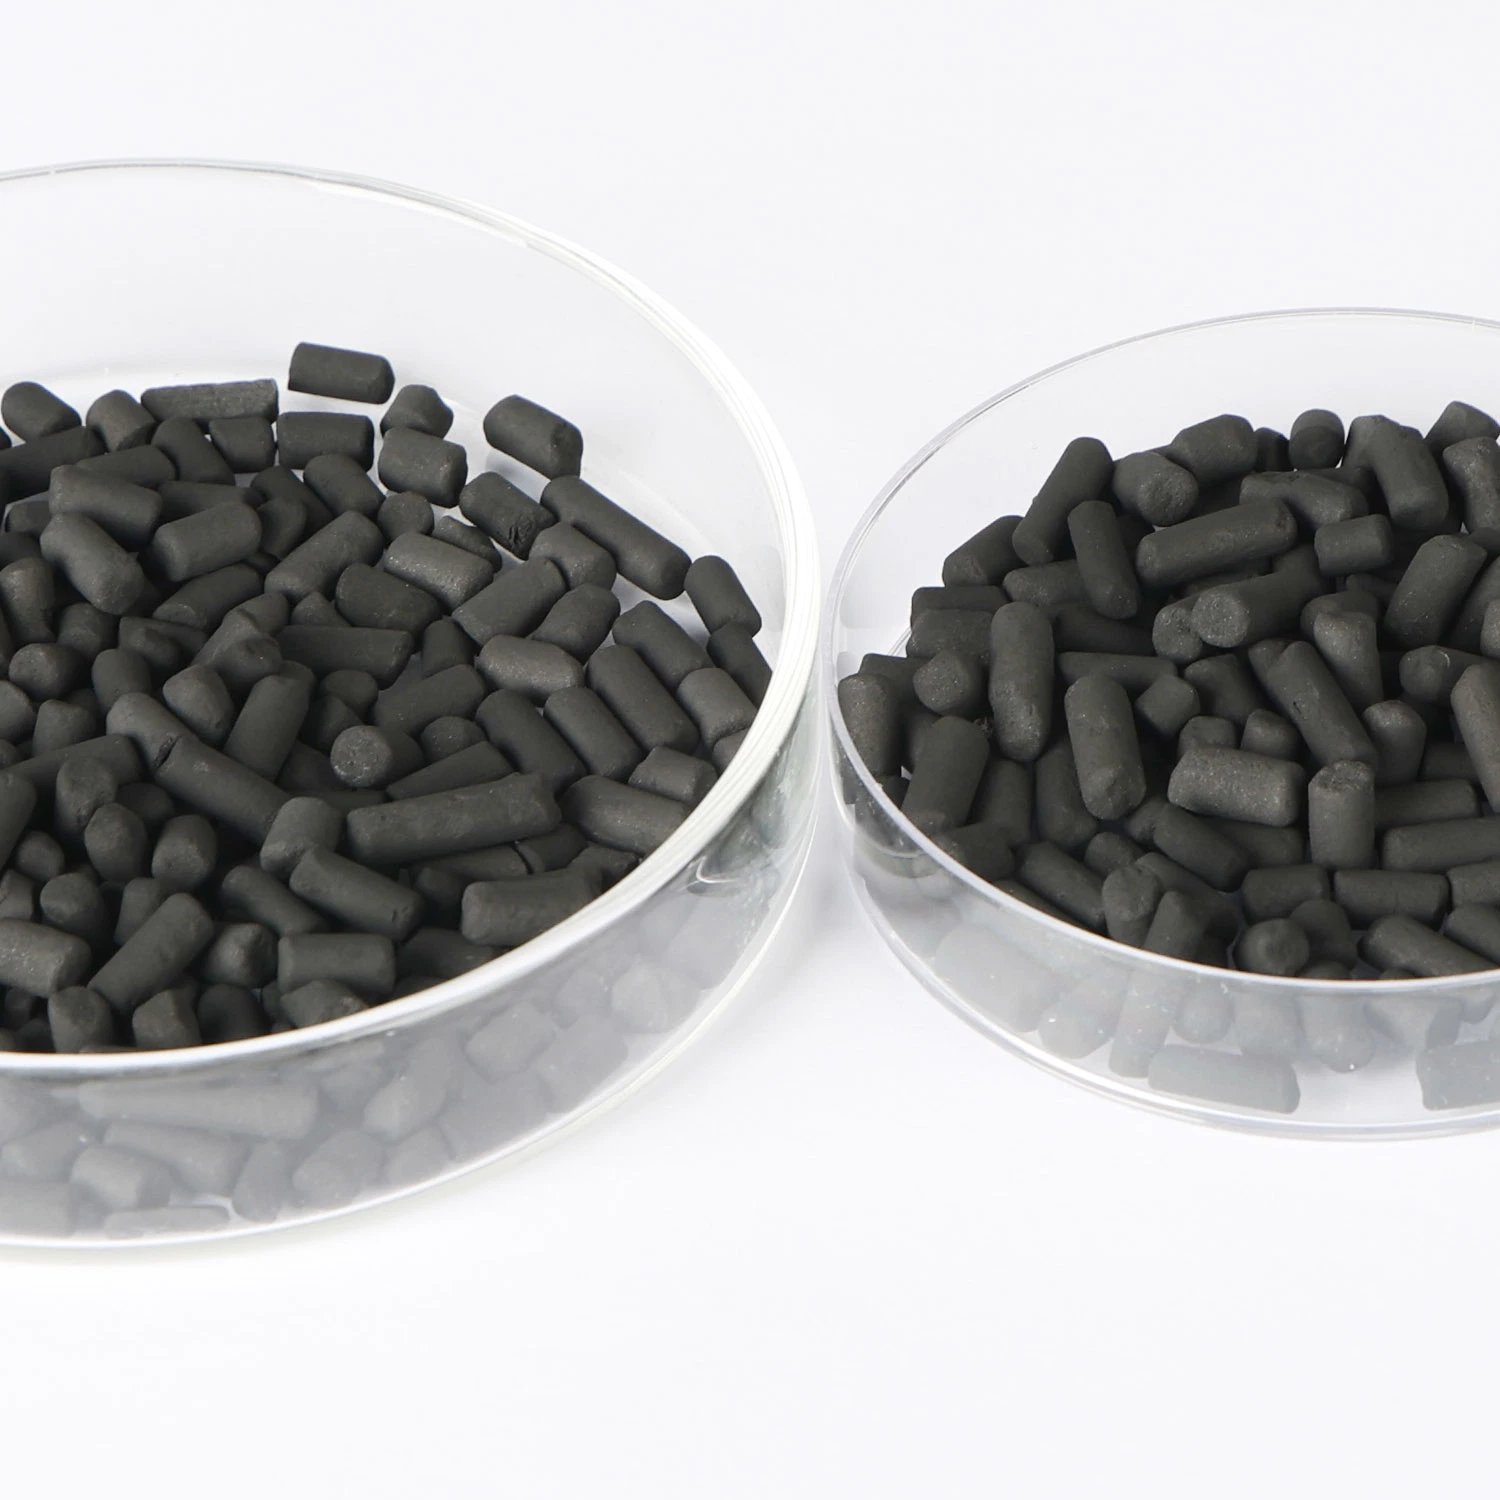 20 Percent Ash Content Black Coal Columnar Activated Carbon Created for Oil and Gas Adsorption Purposes